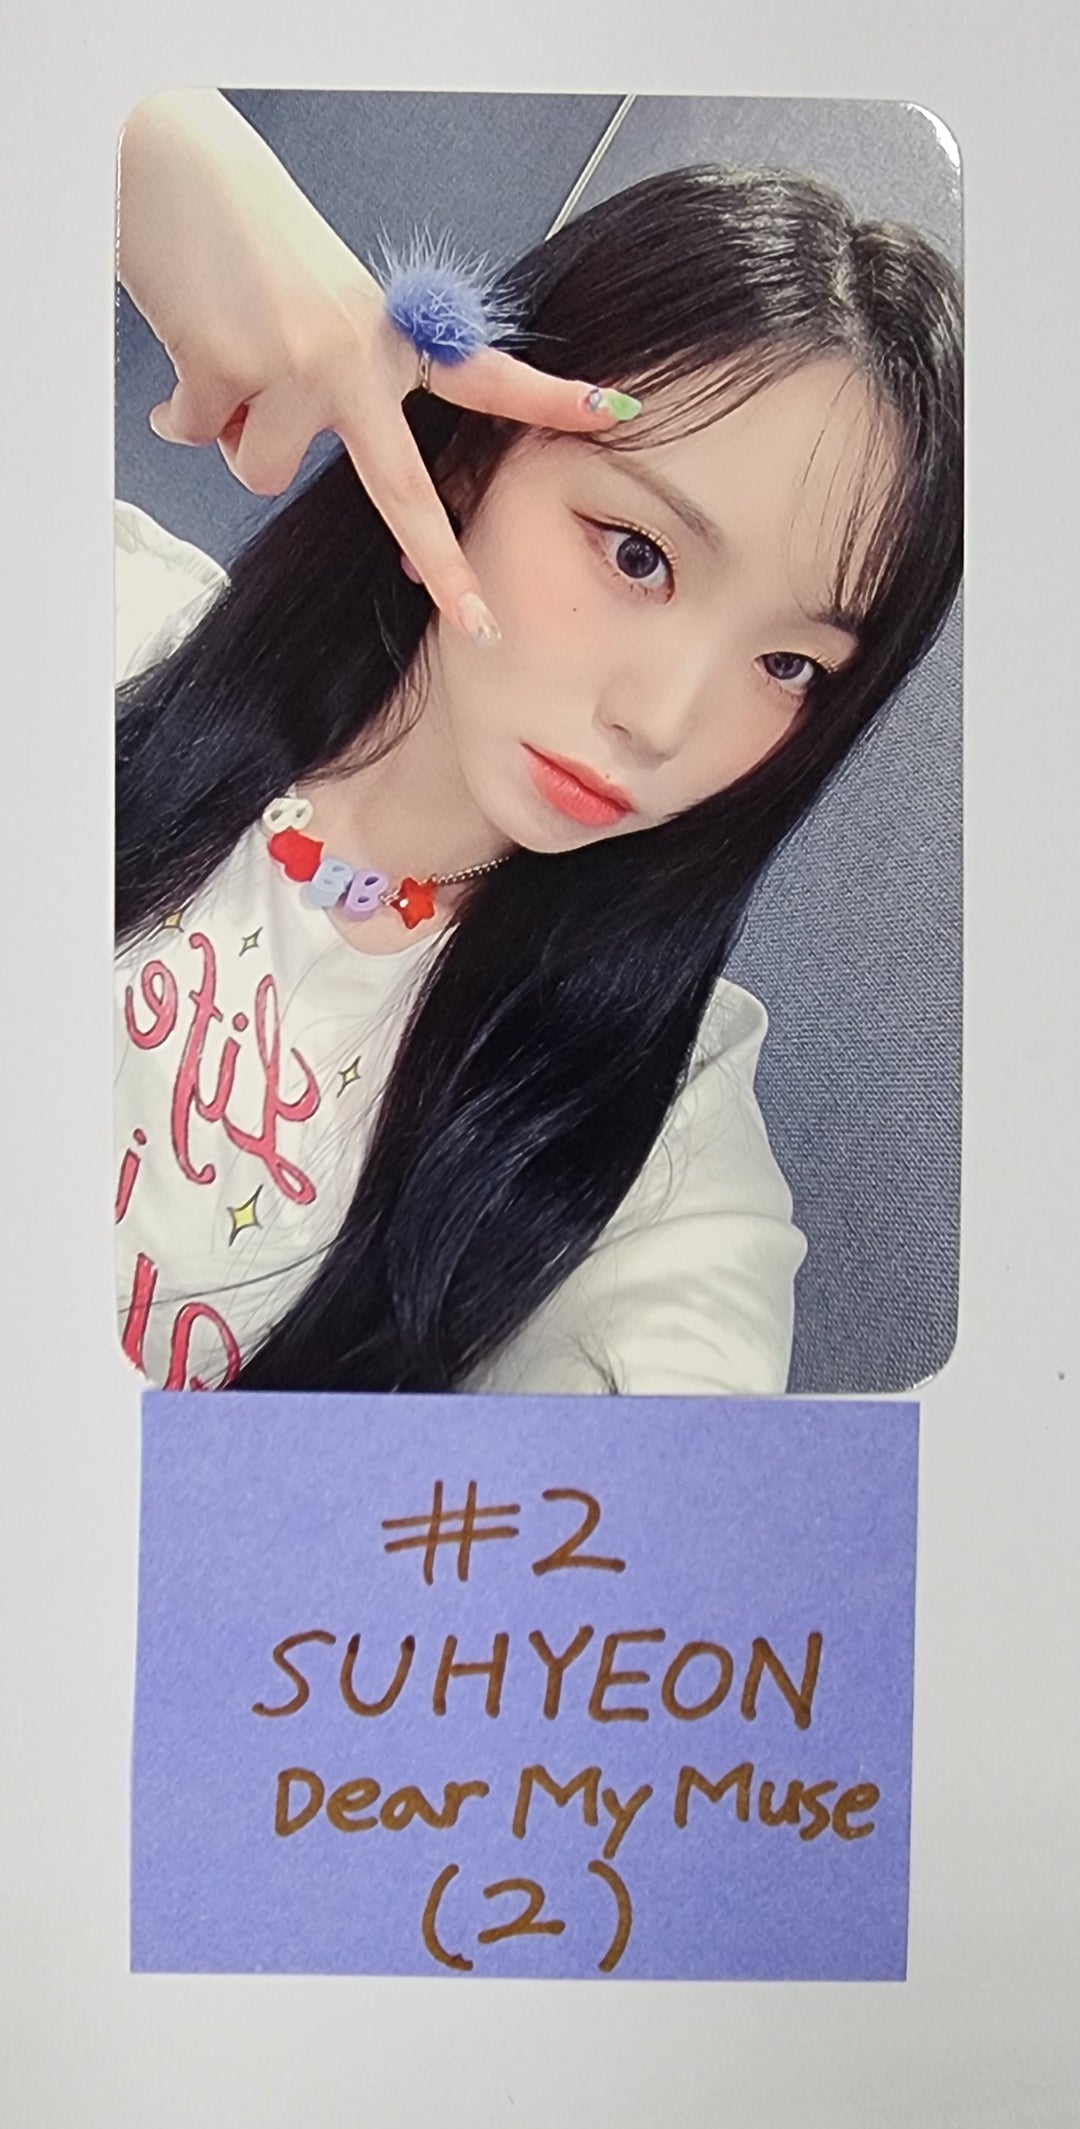 Billlie "the Billage of perception: chapter three" Mini 4th - Dear My Muse Fansign Event Photocard Round 2